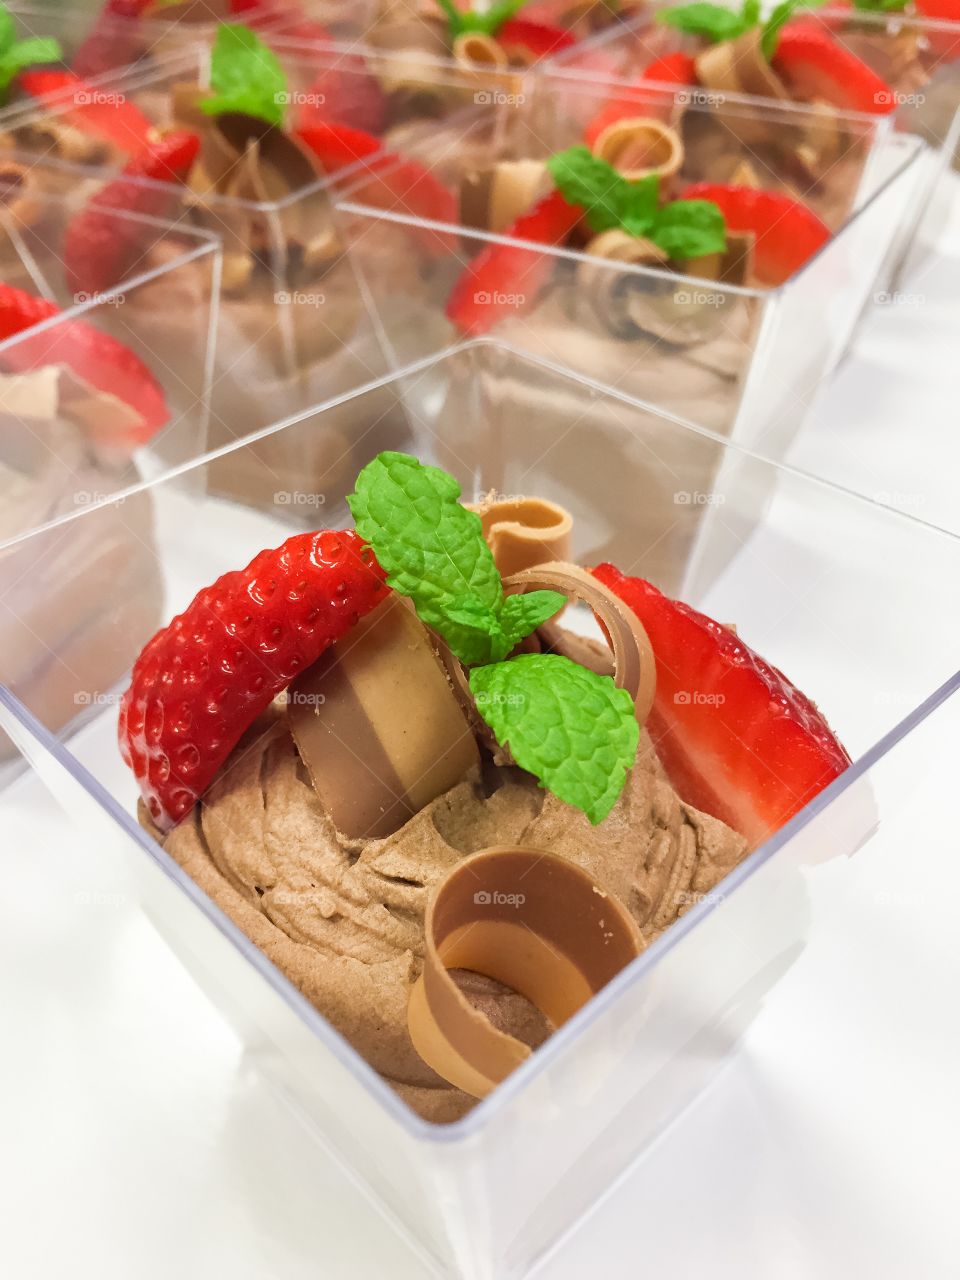 Chocolate mousse dessert with strawberries.